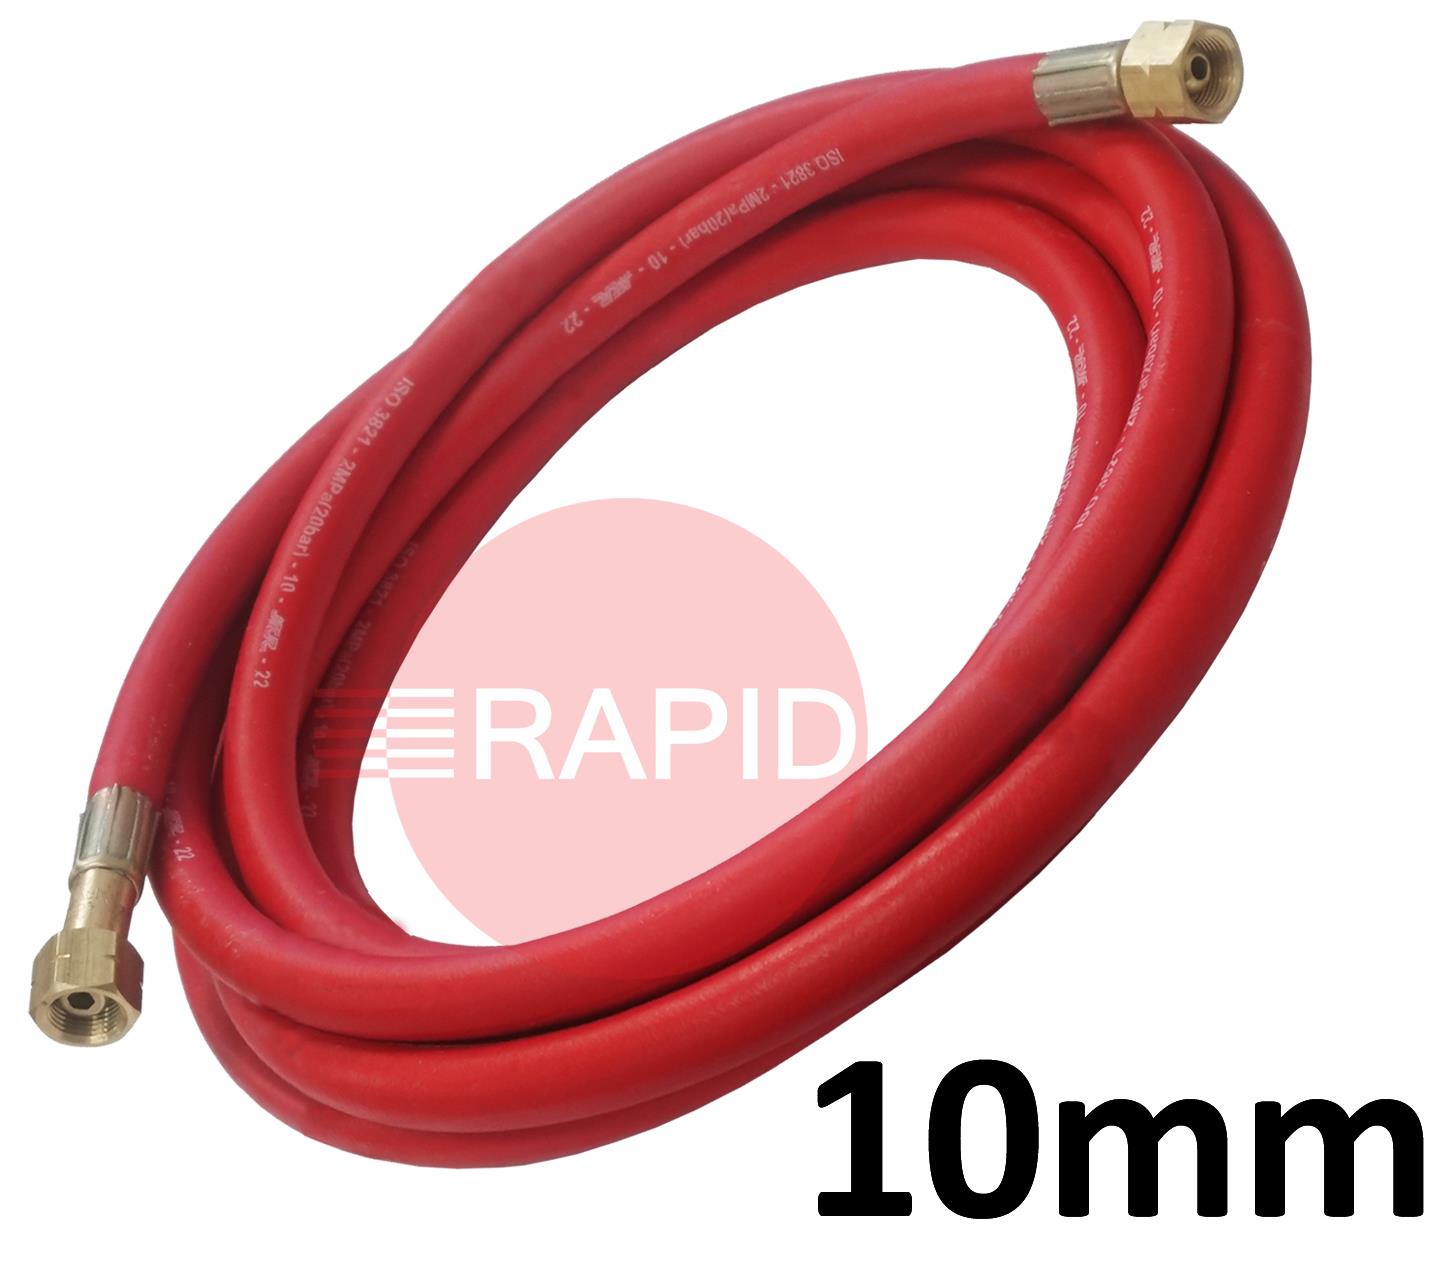 A5130  Fitted Acetylene Hose. 10mm Bore. G3/8 Check Valve & G3/8 Regulator Connection - 10m